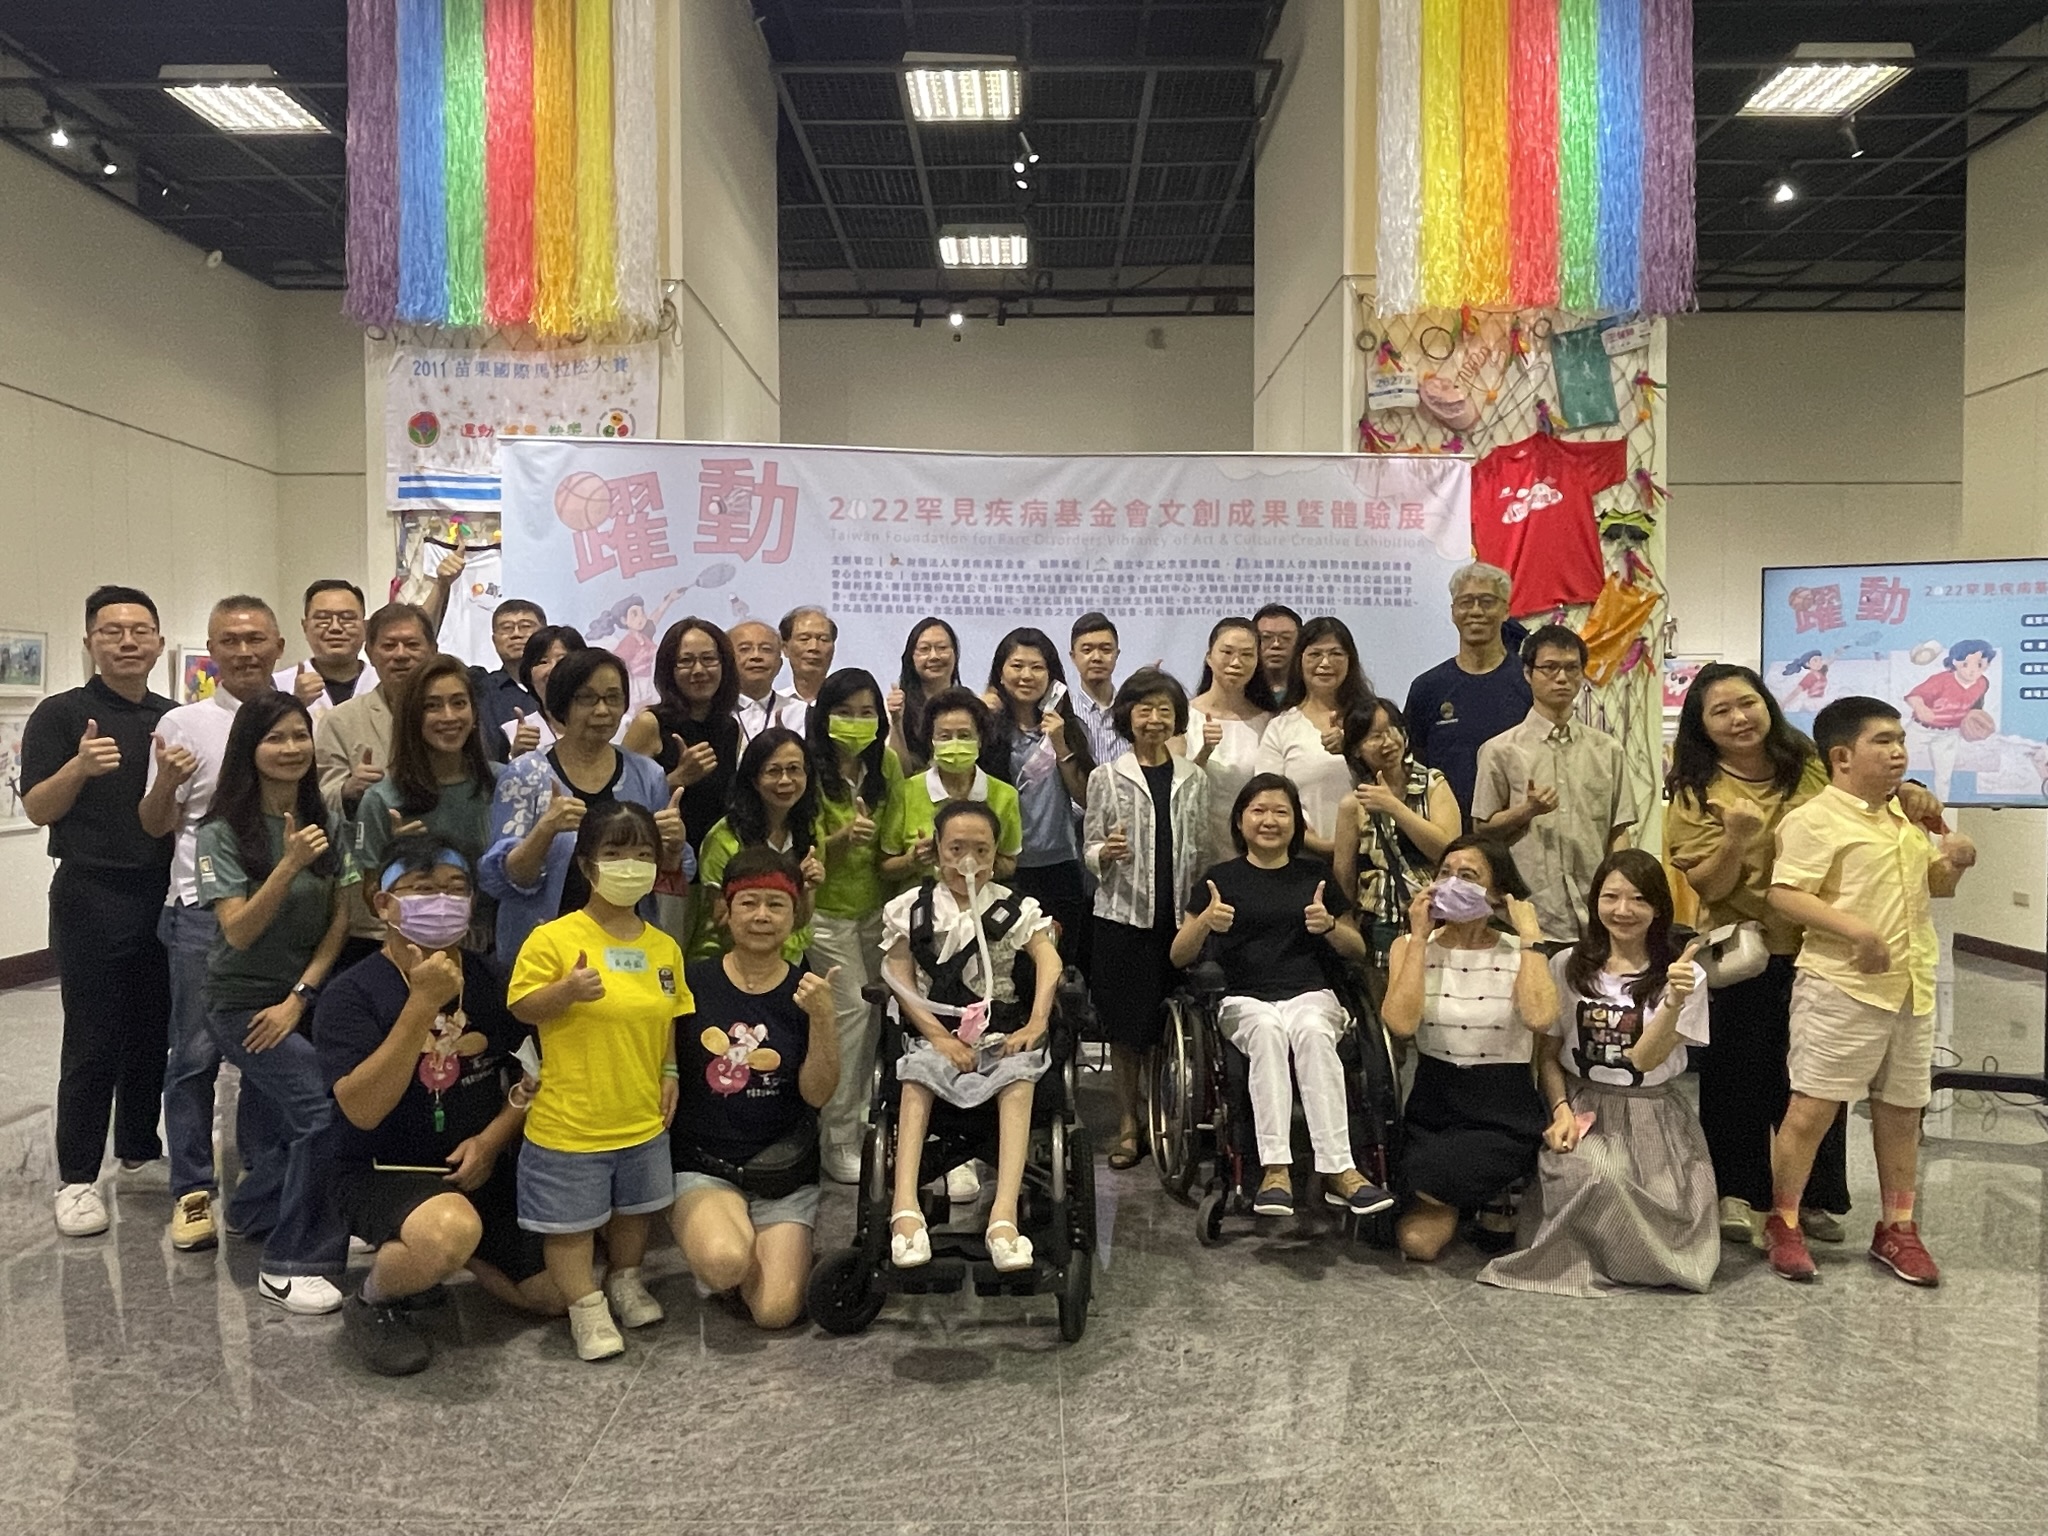 20220909-1004 Leap - Taiwan Foundation for Rare Disorders 2022 Art and Experience Exhibition